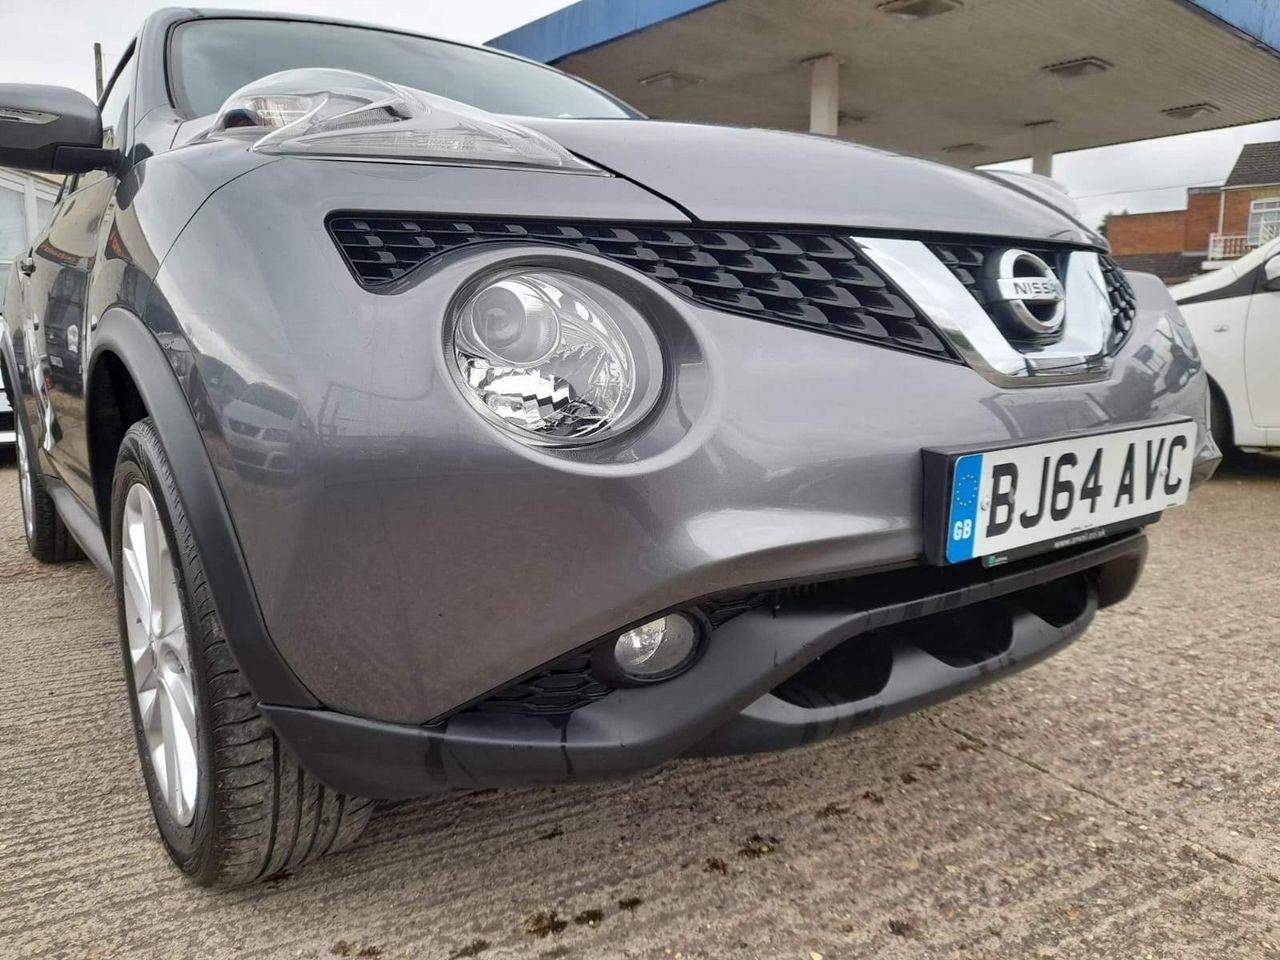 2014 Nissan Juke 1.5 dCi 8v Acenta Euro 5 (s/s) 5dr - Picture 9 of 48